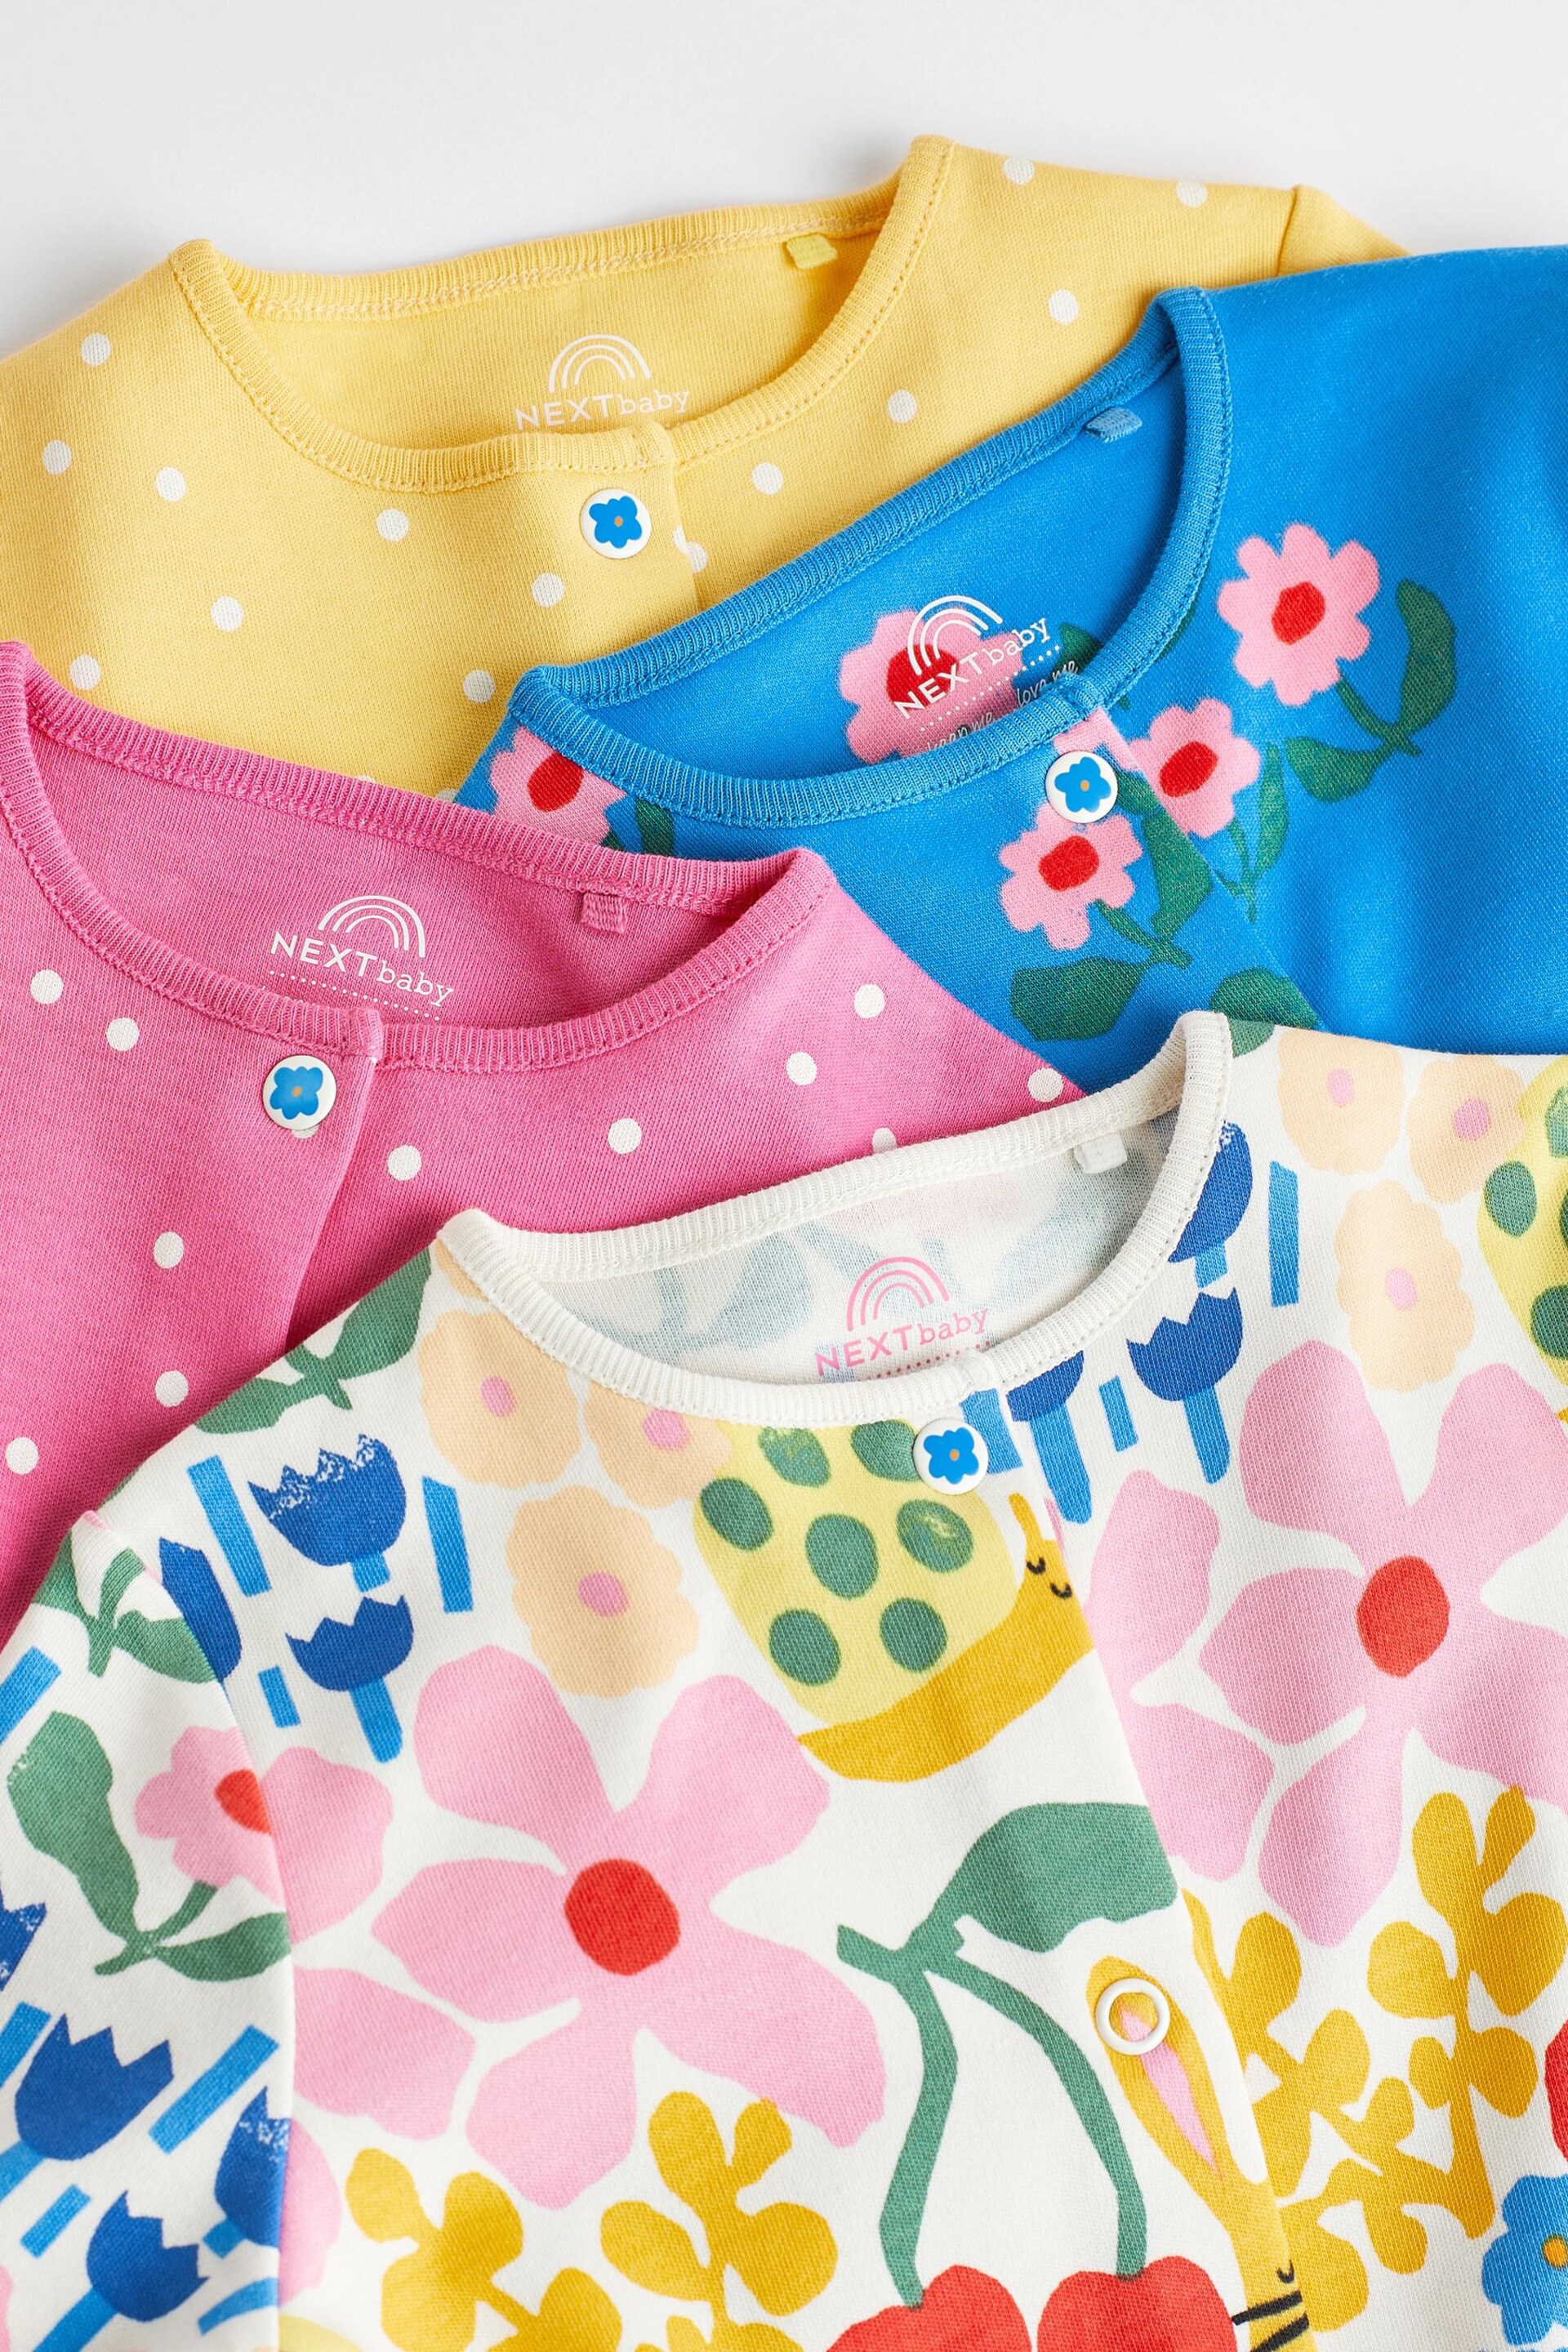 Multi Bright Baby 4 Pack Footed Sleepsuits (0-3yrs) - Image 8 of 13